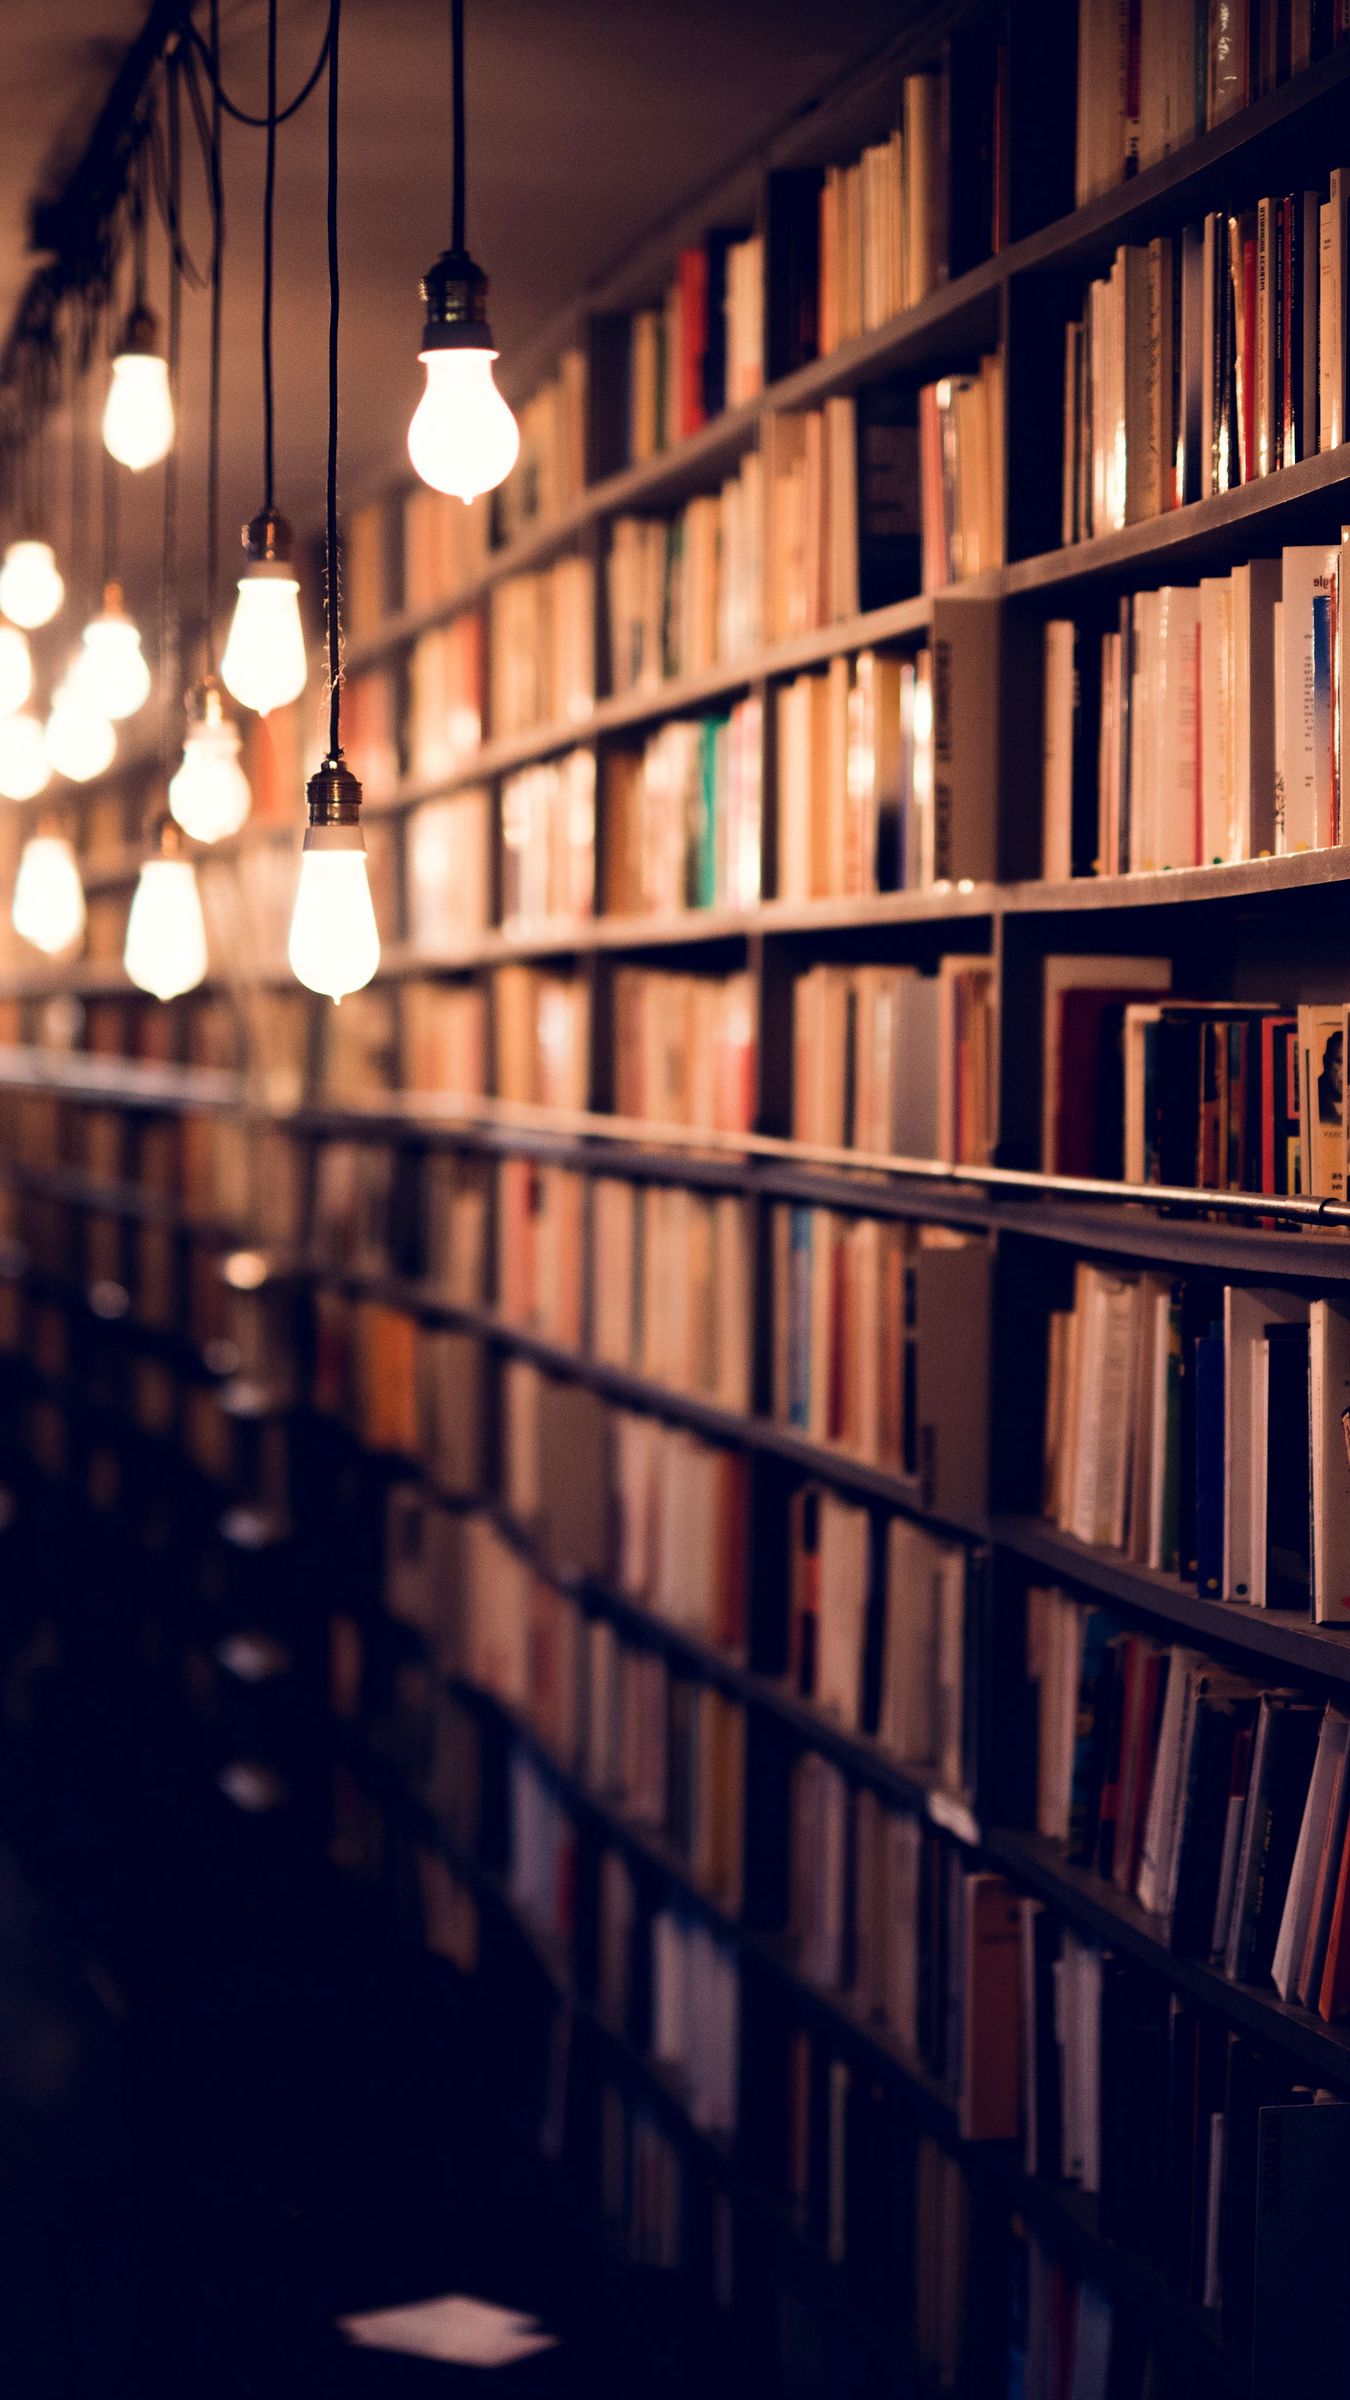 Download wallpaper 1350x2400 books library shelves lighting iphone  876s6 for parallax hd background